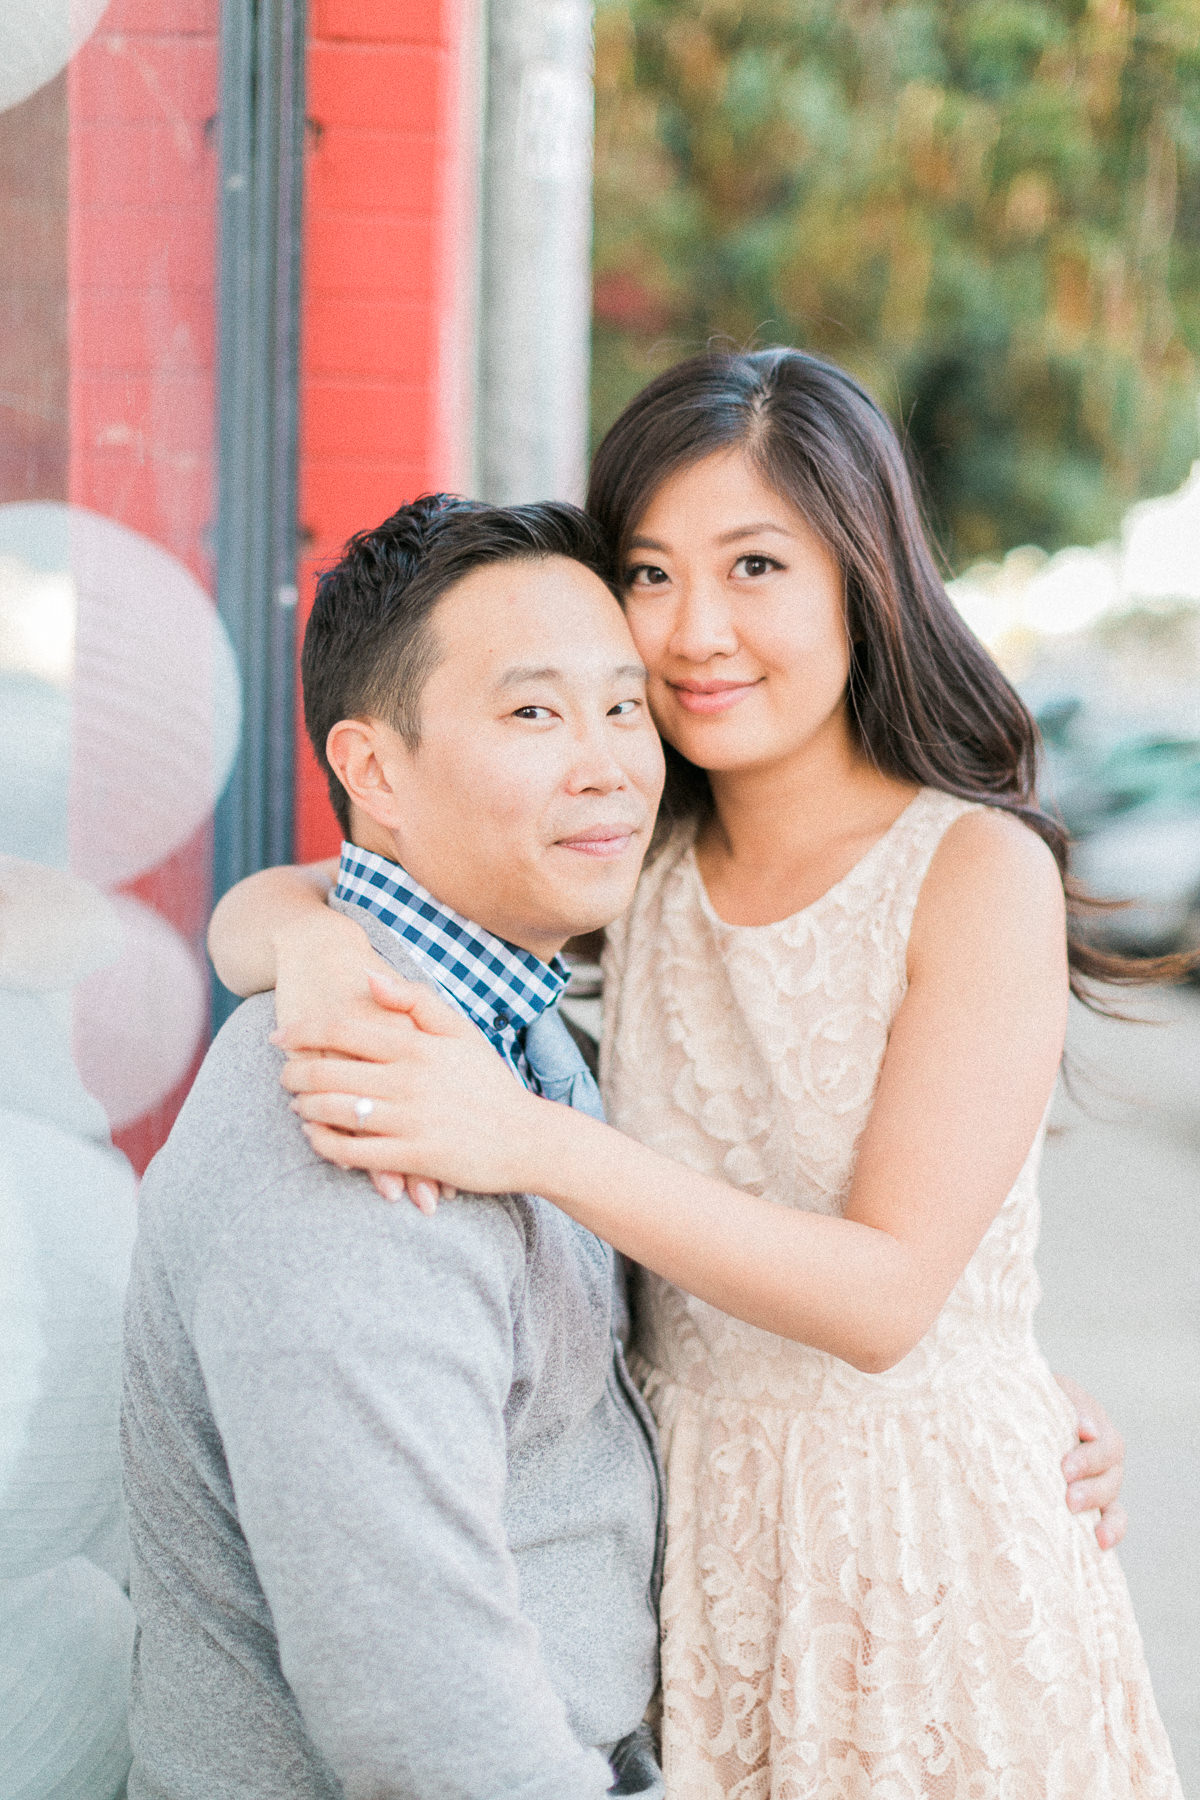 downtown-los-angeles-engagement-pictures (13)